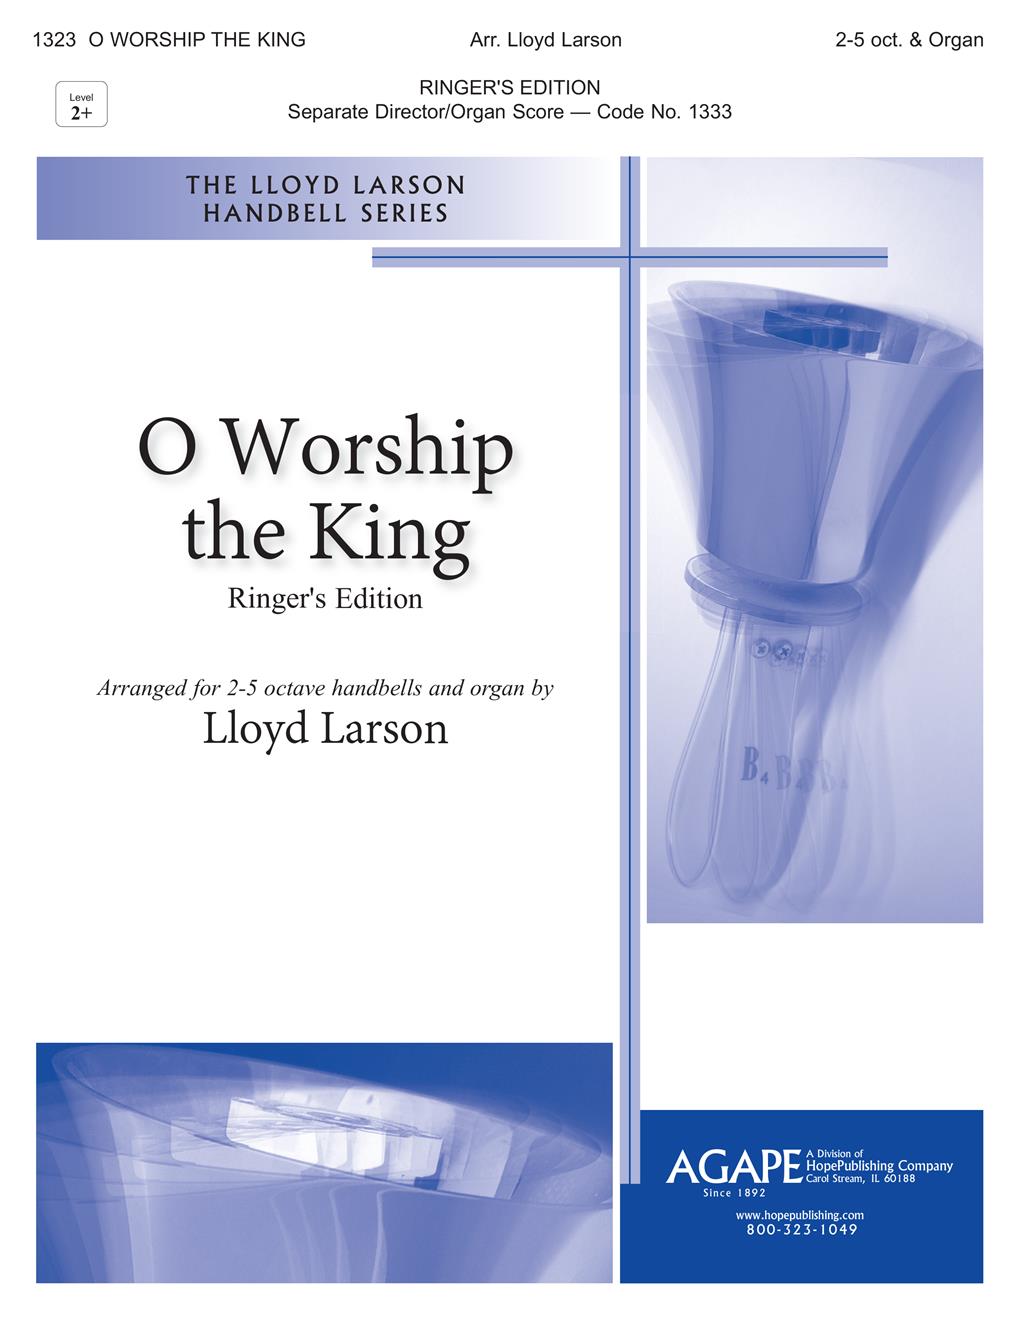 O Worship the King - 2-5 oct. Cover Image